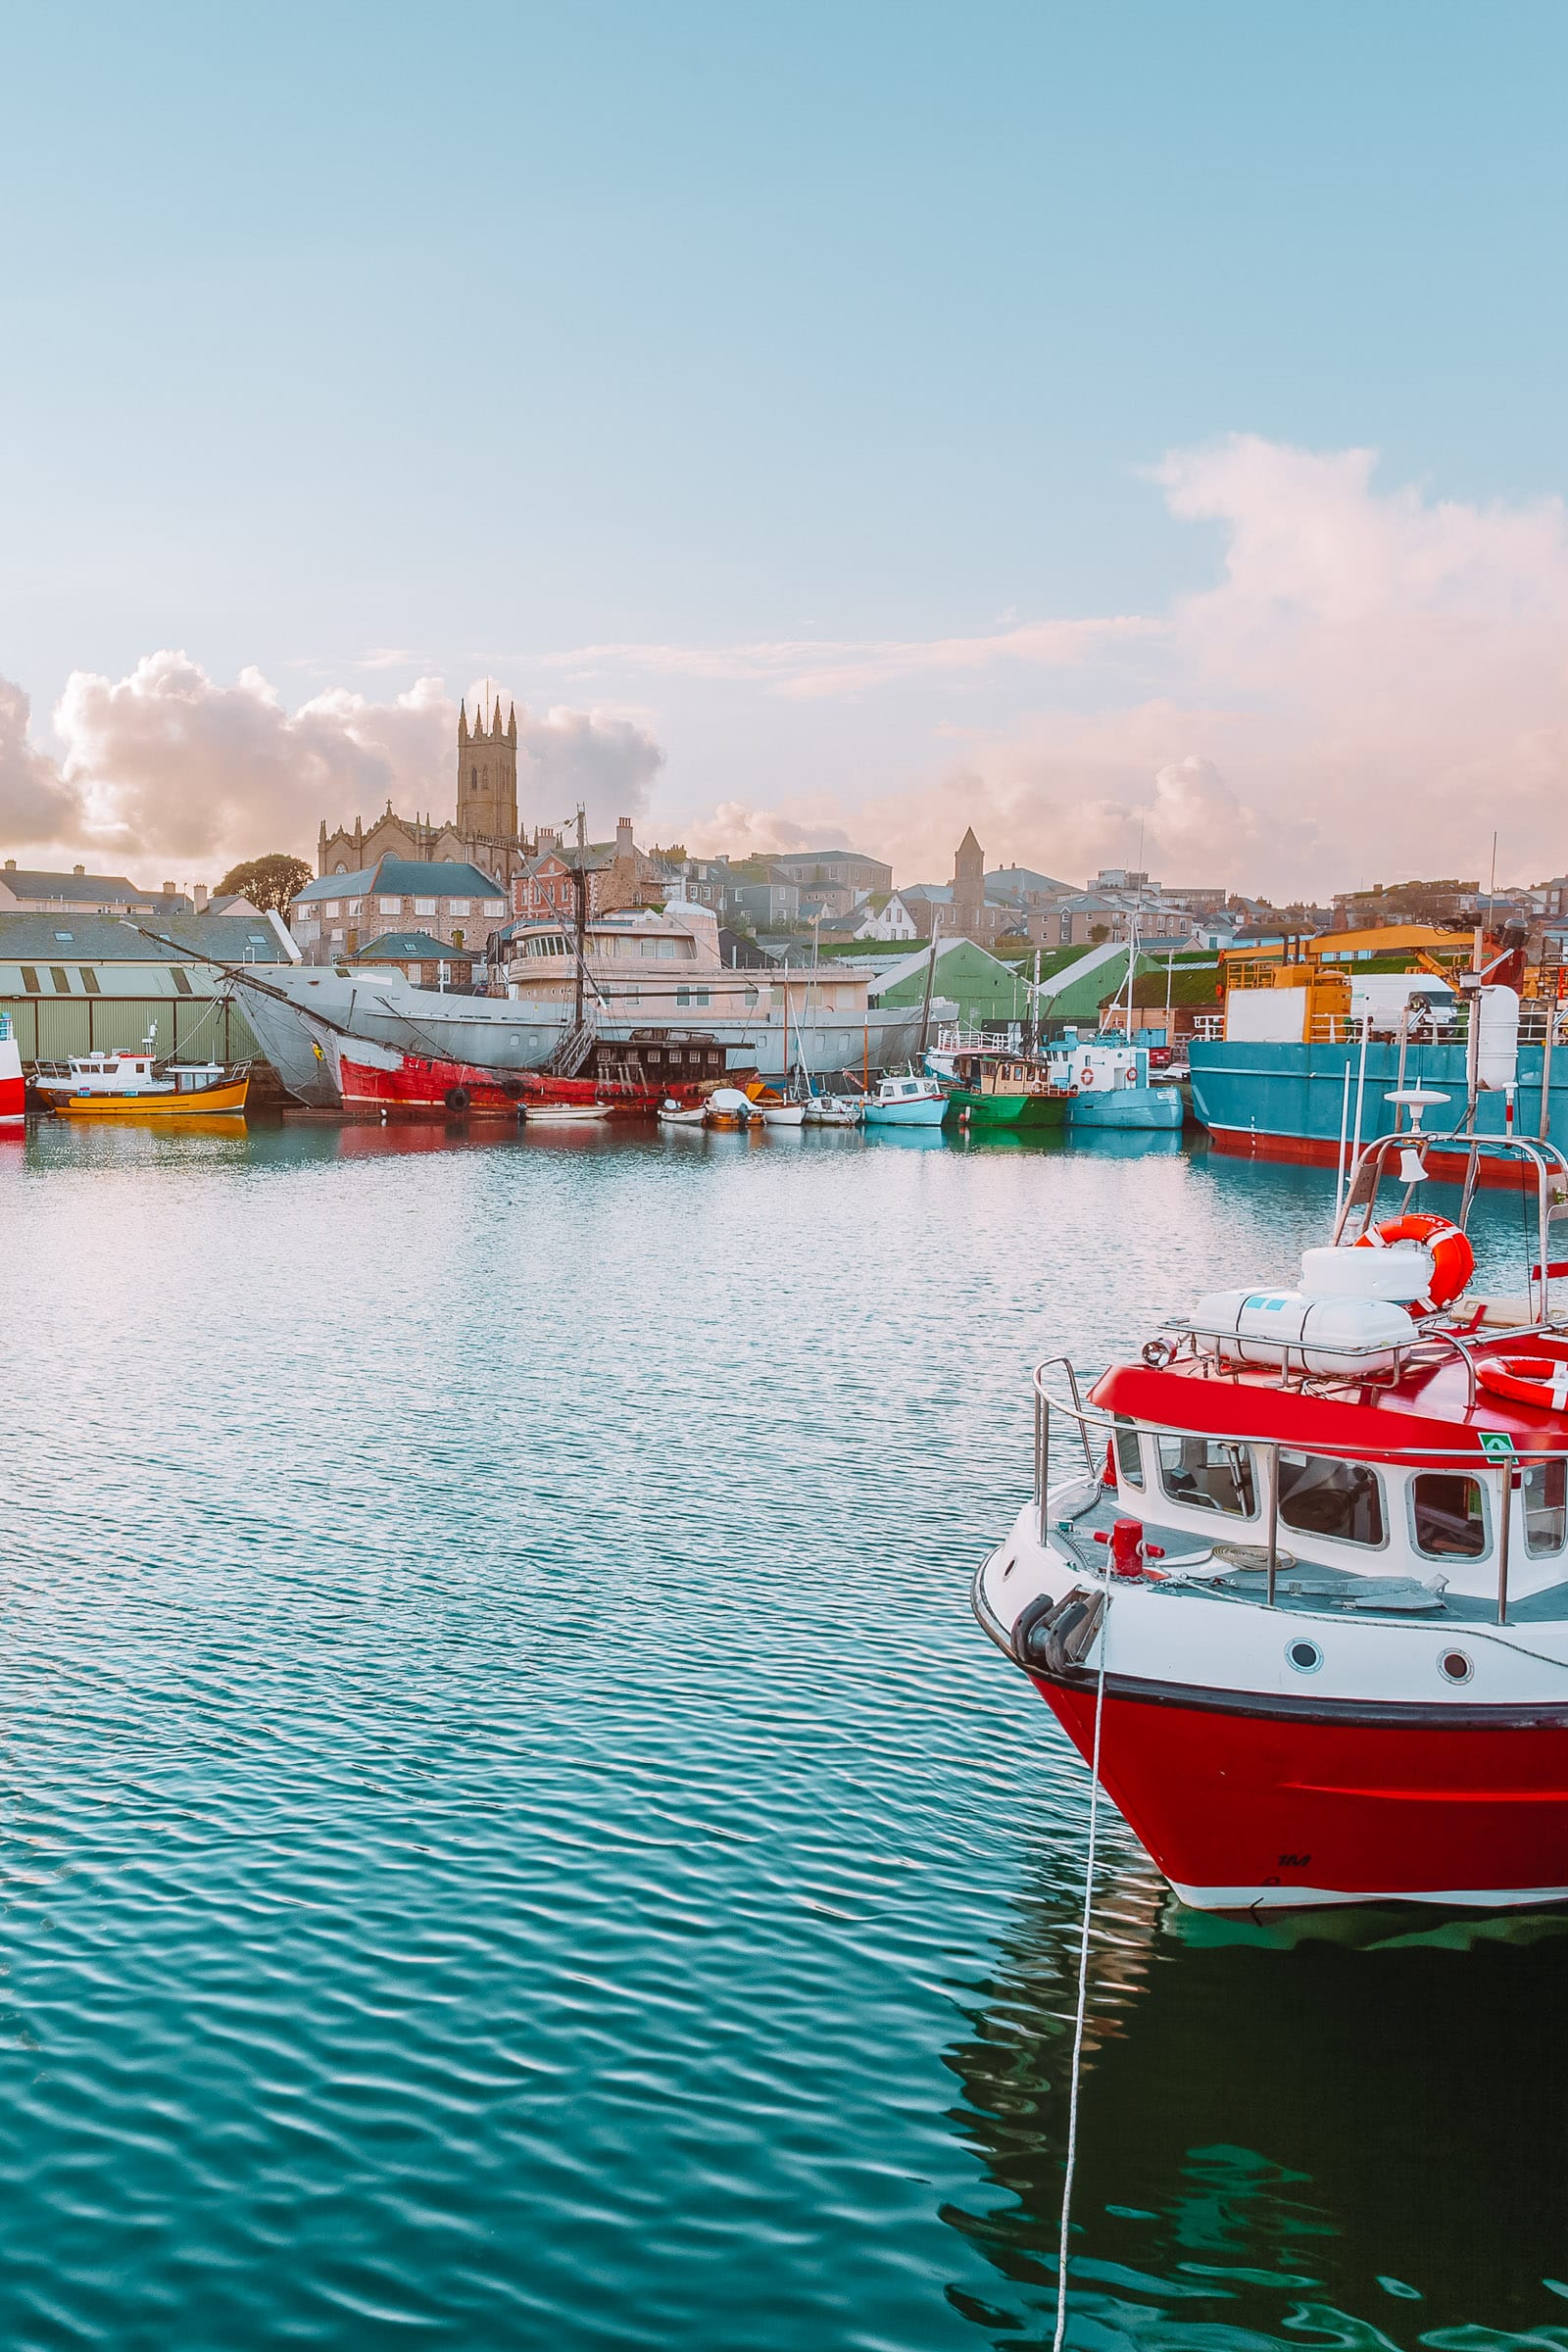 11 Best Things To Do In Penzance, Cornwall